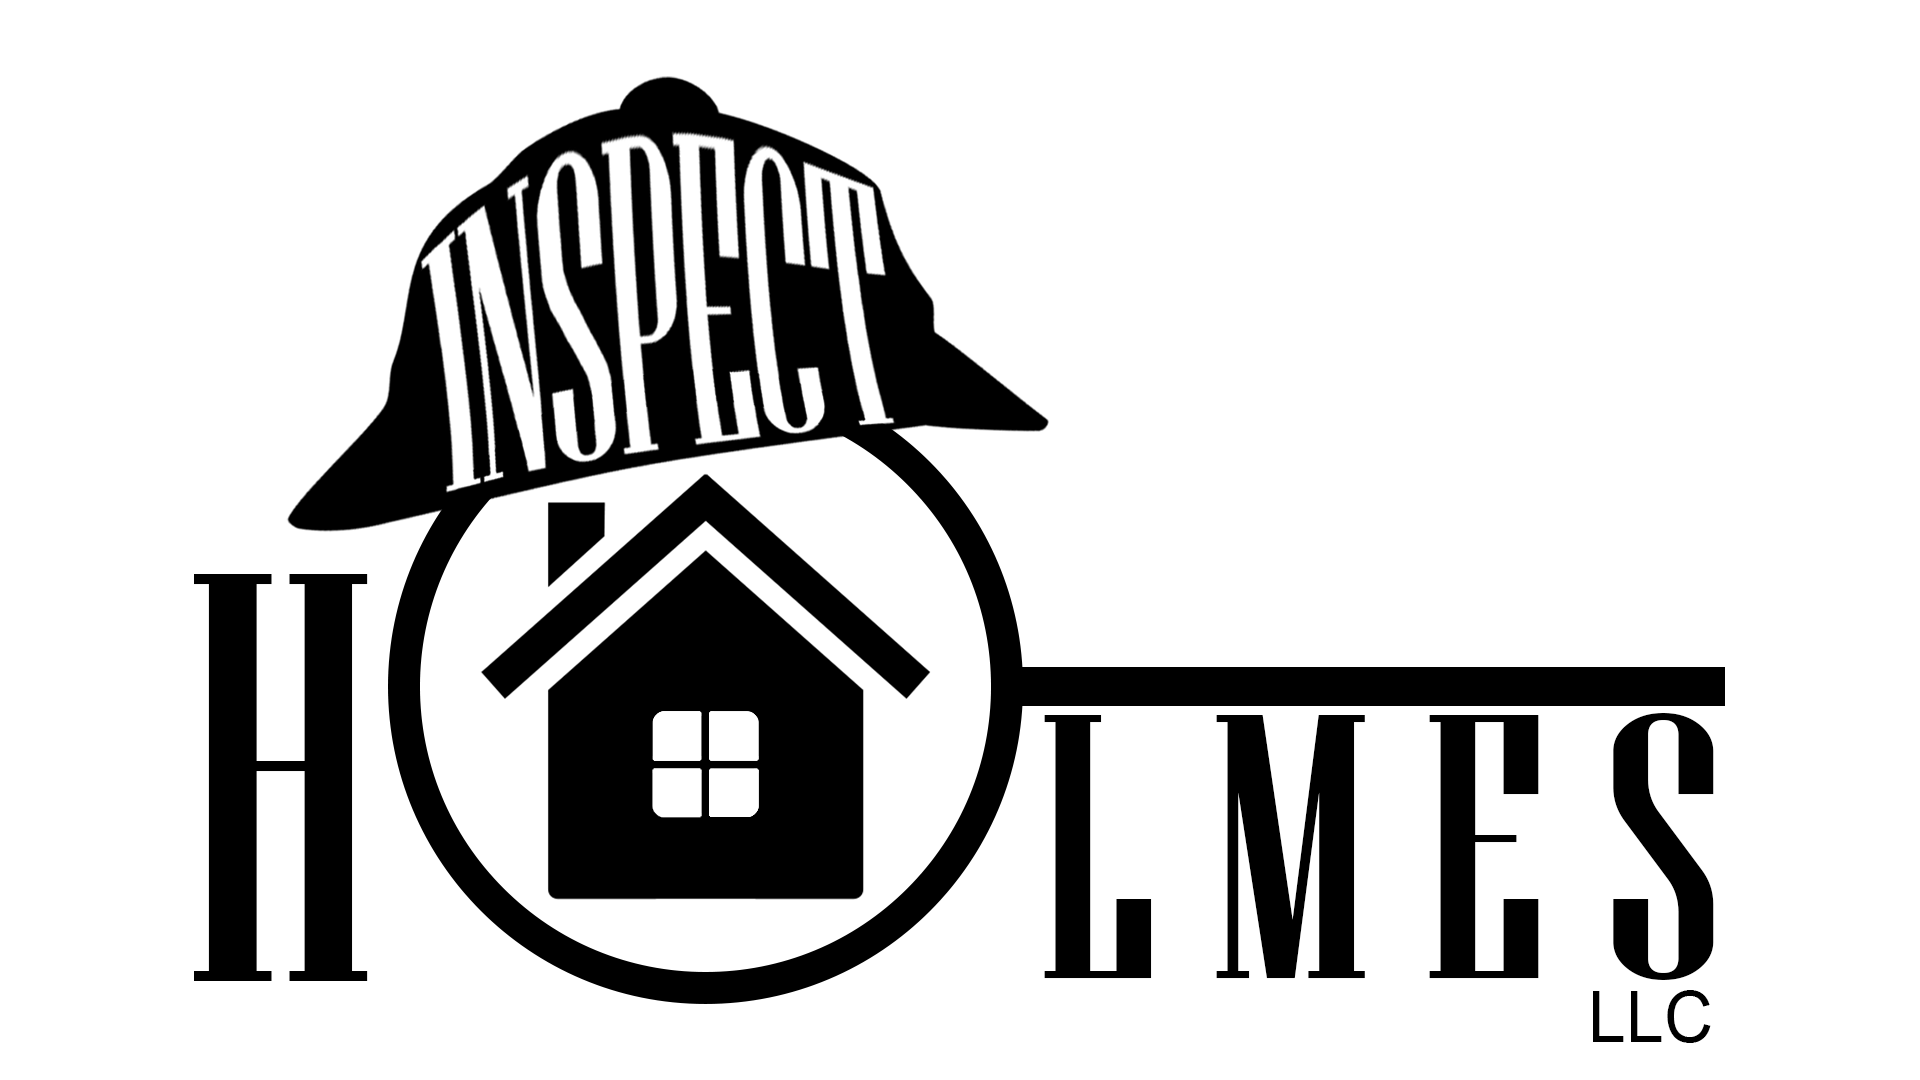 Schedule an Inspection-Inspect Holmes 702-401-4989